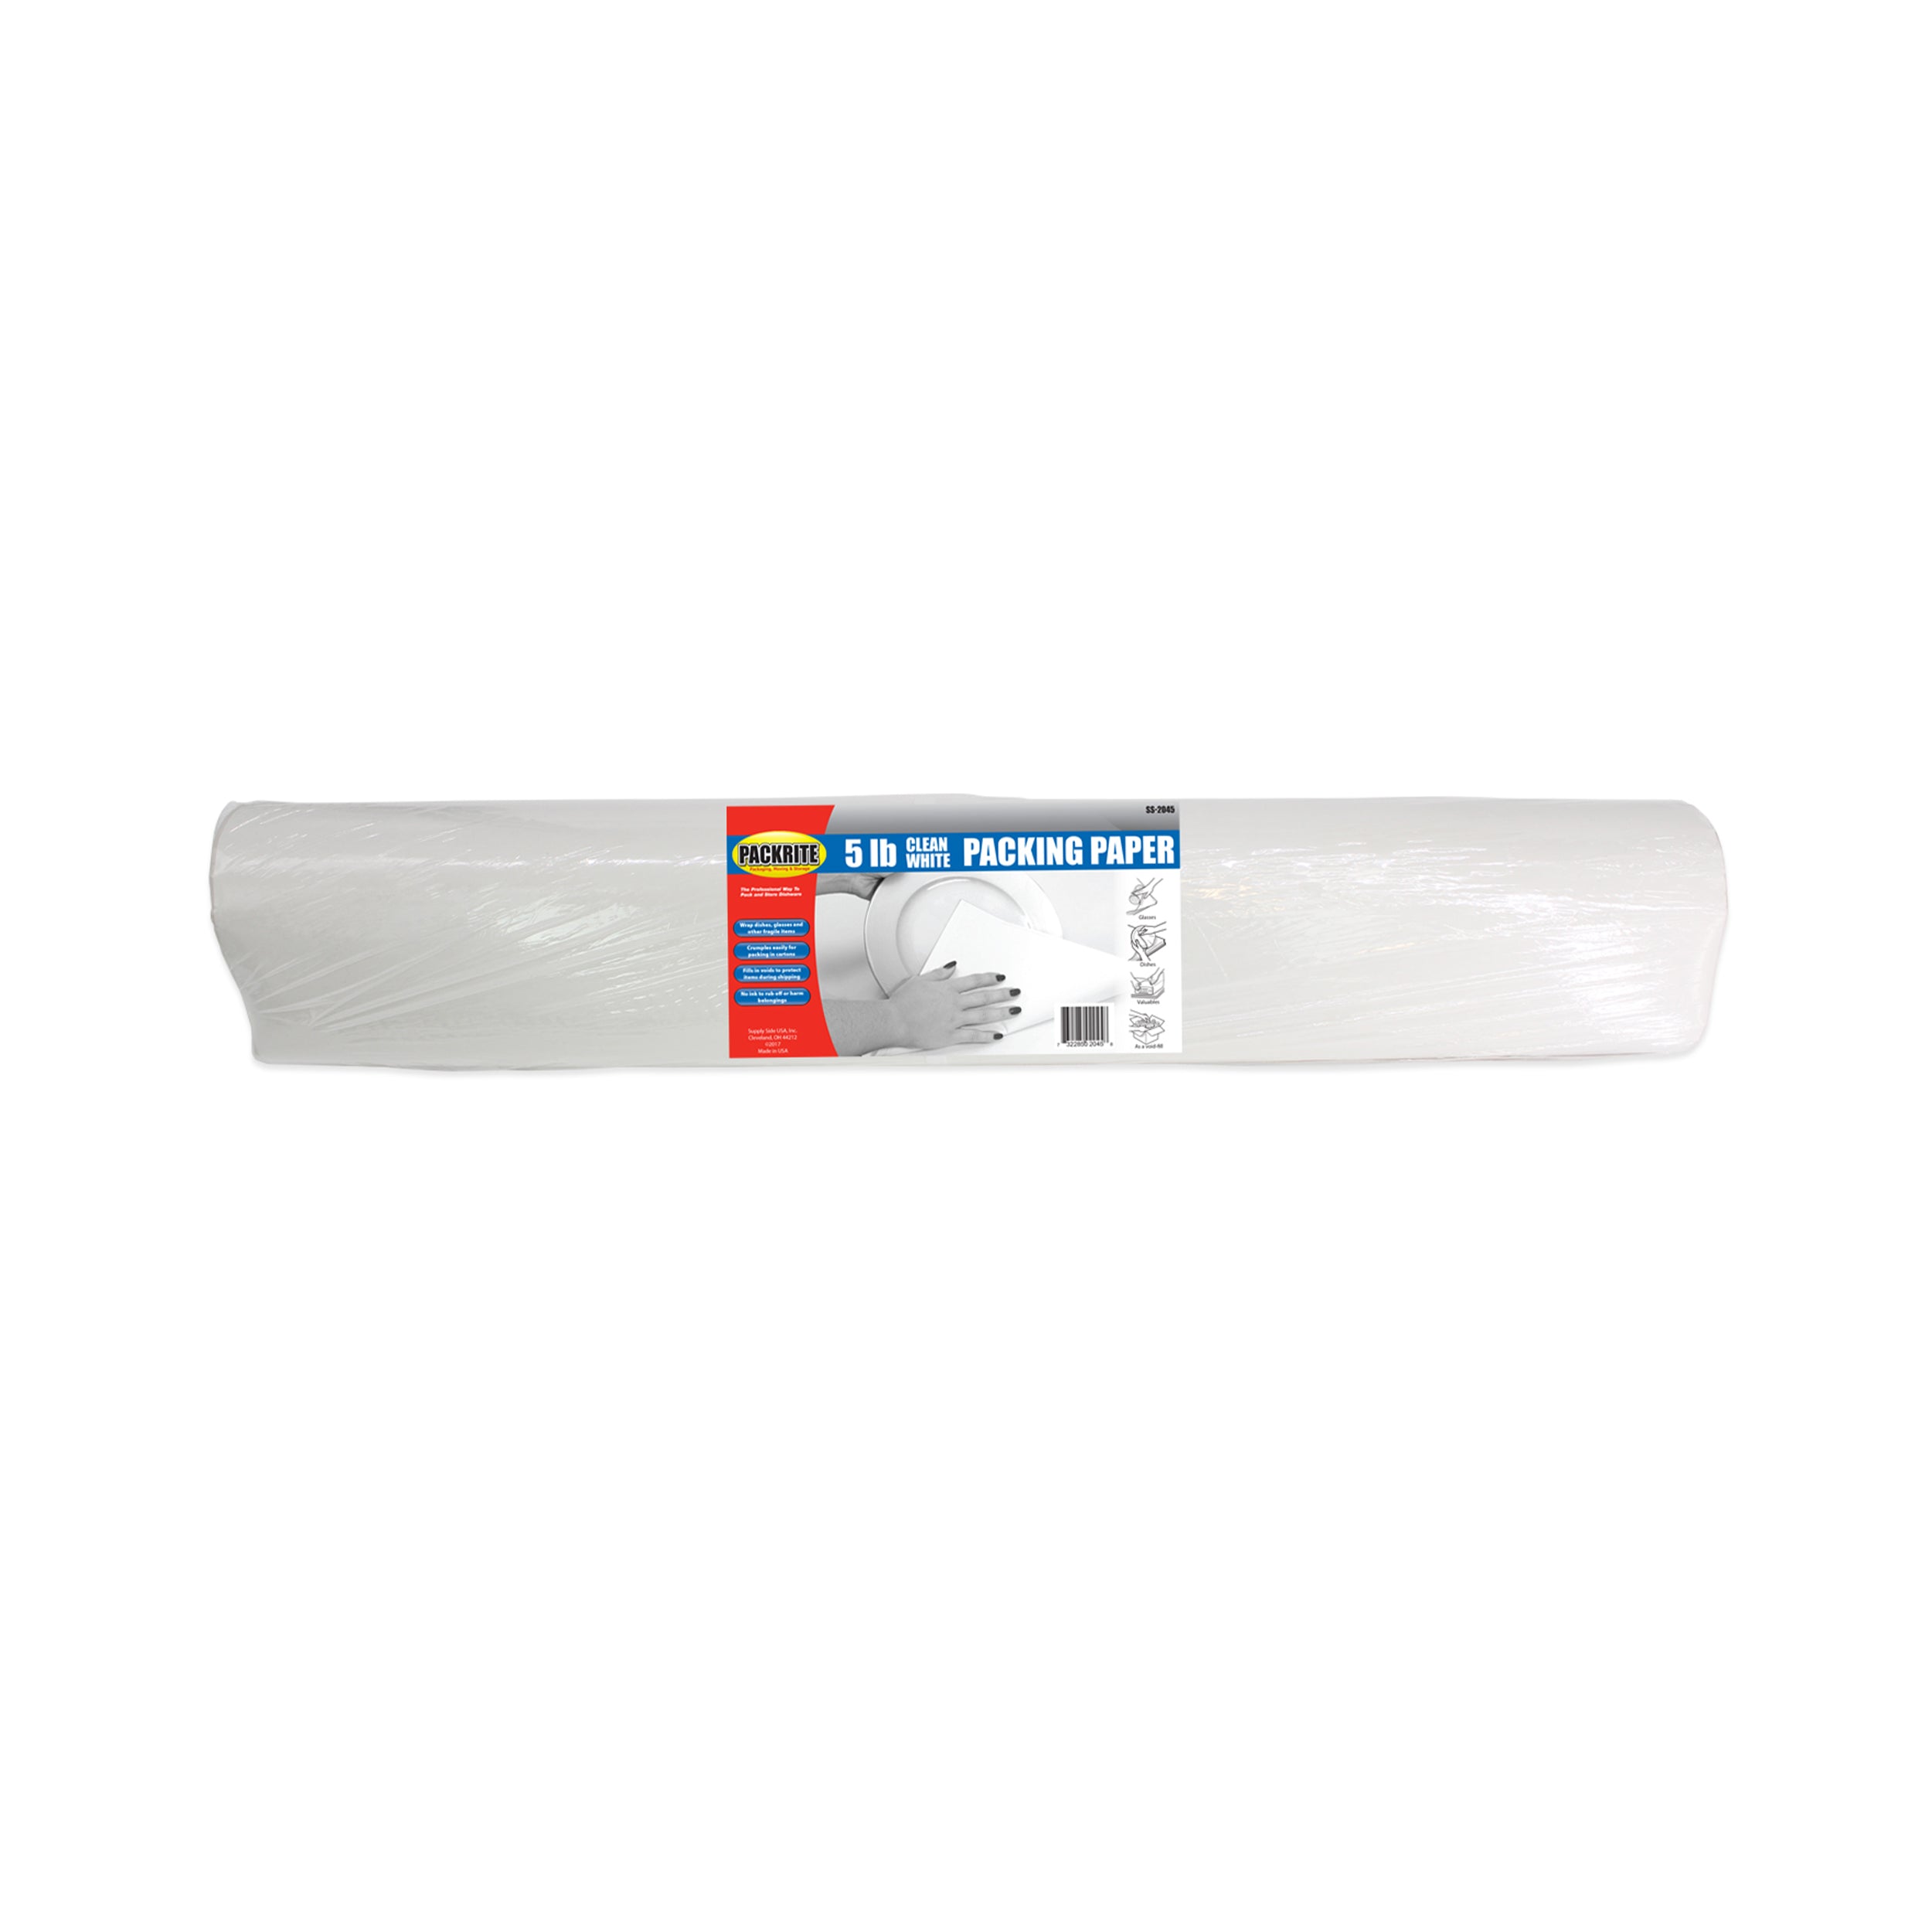 Newsprint Packing Paper 24" x 30" Sheets - Pack of 100 Sheets